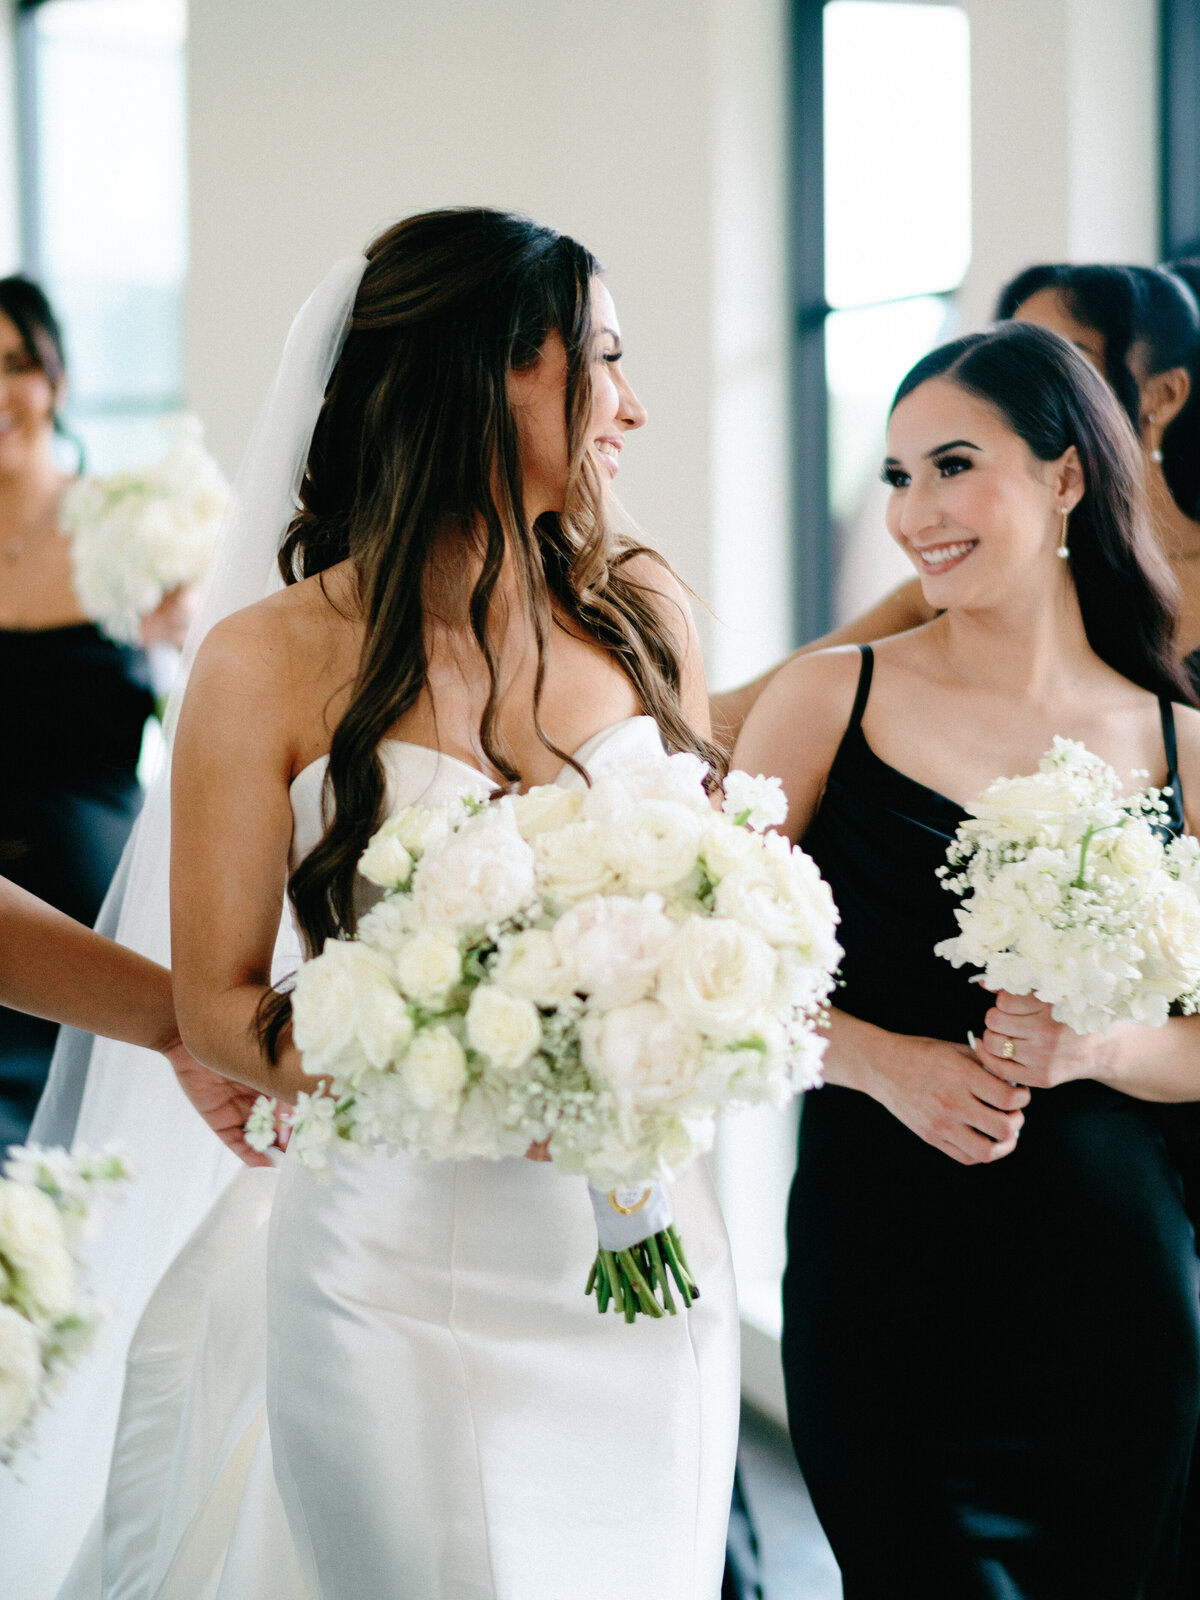 Modern bride walking and smiling at bridesmaids wearing black with white flowers